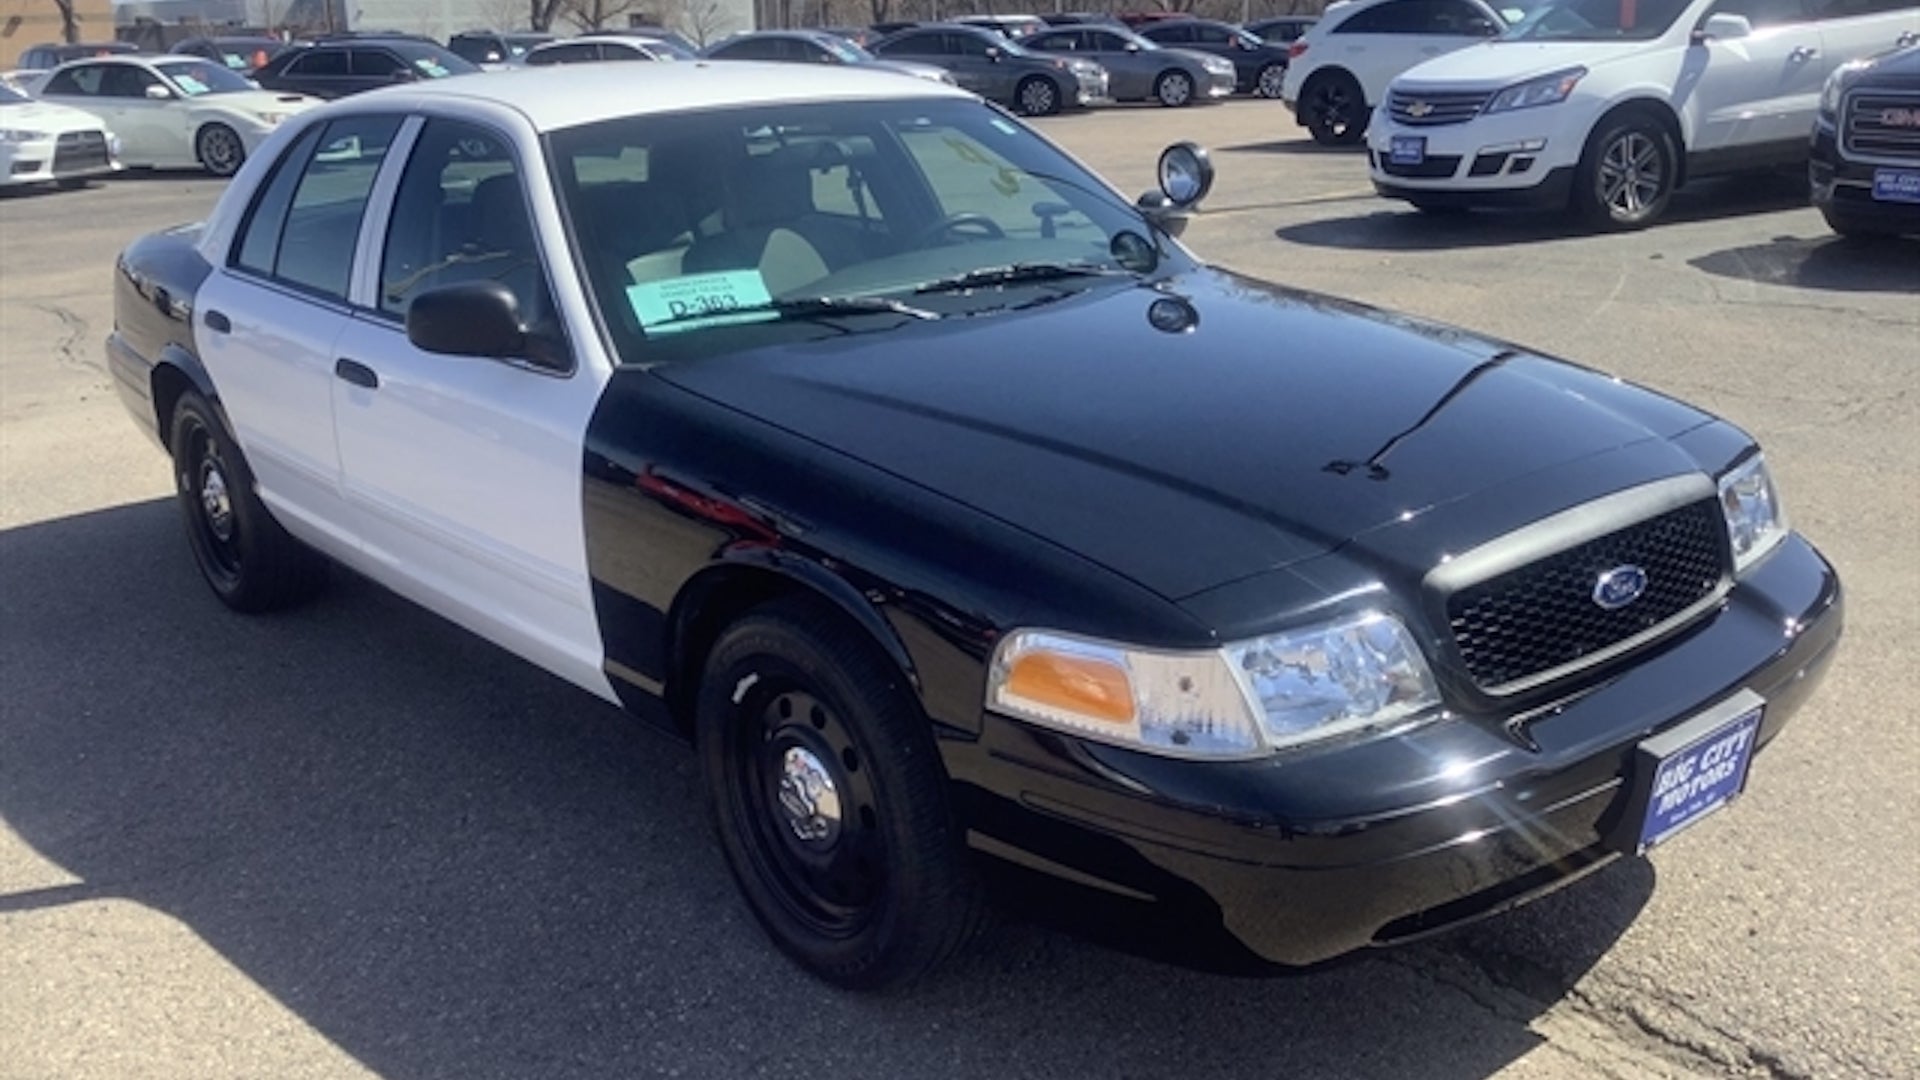 You'll Never Get Another Chance to Buy a 3K-Mile Ford Crown Victoria